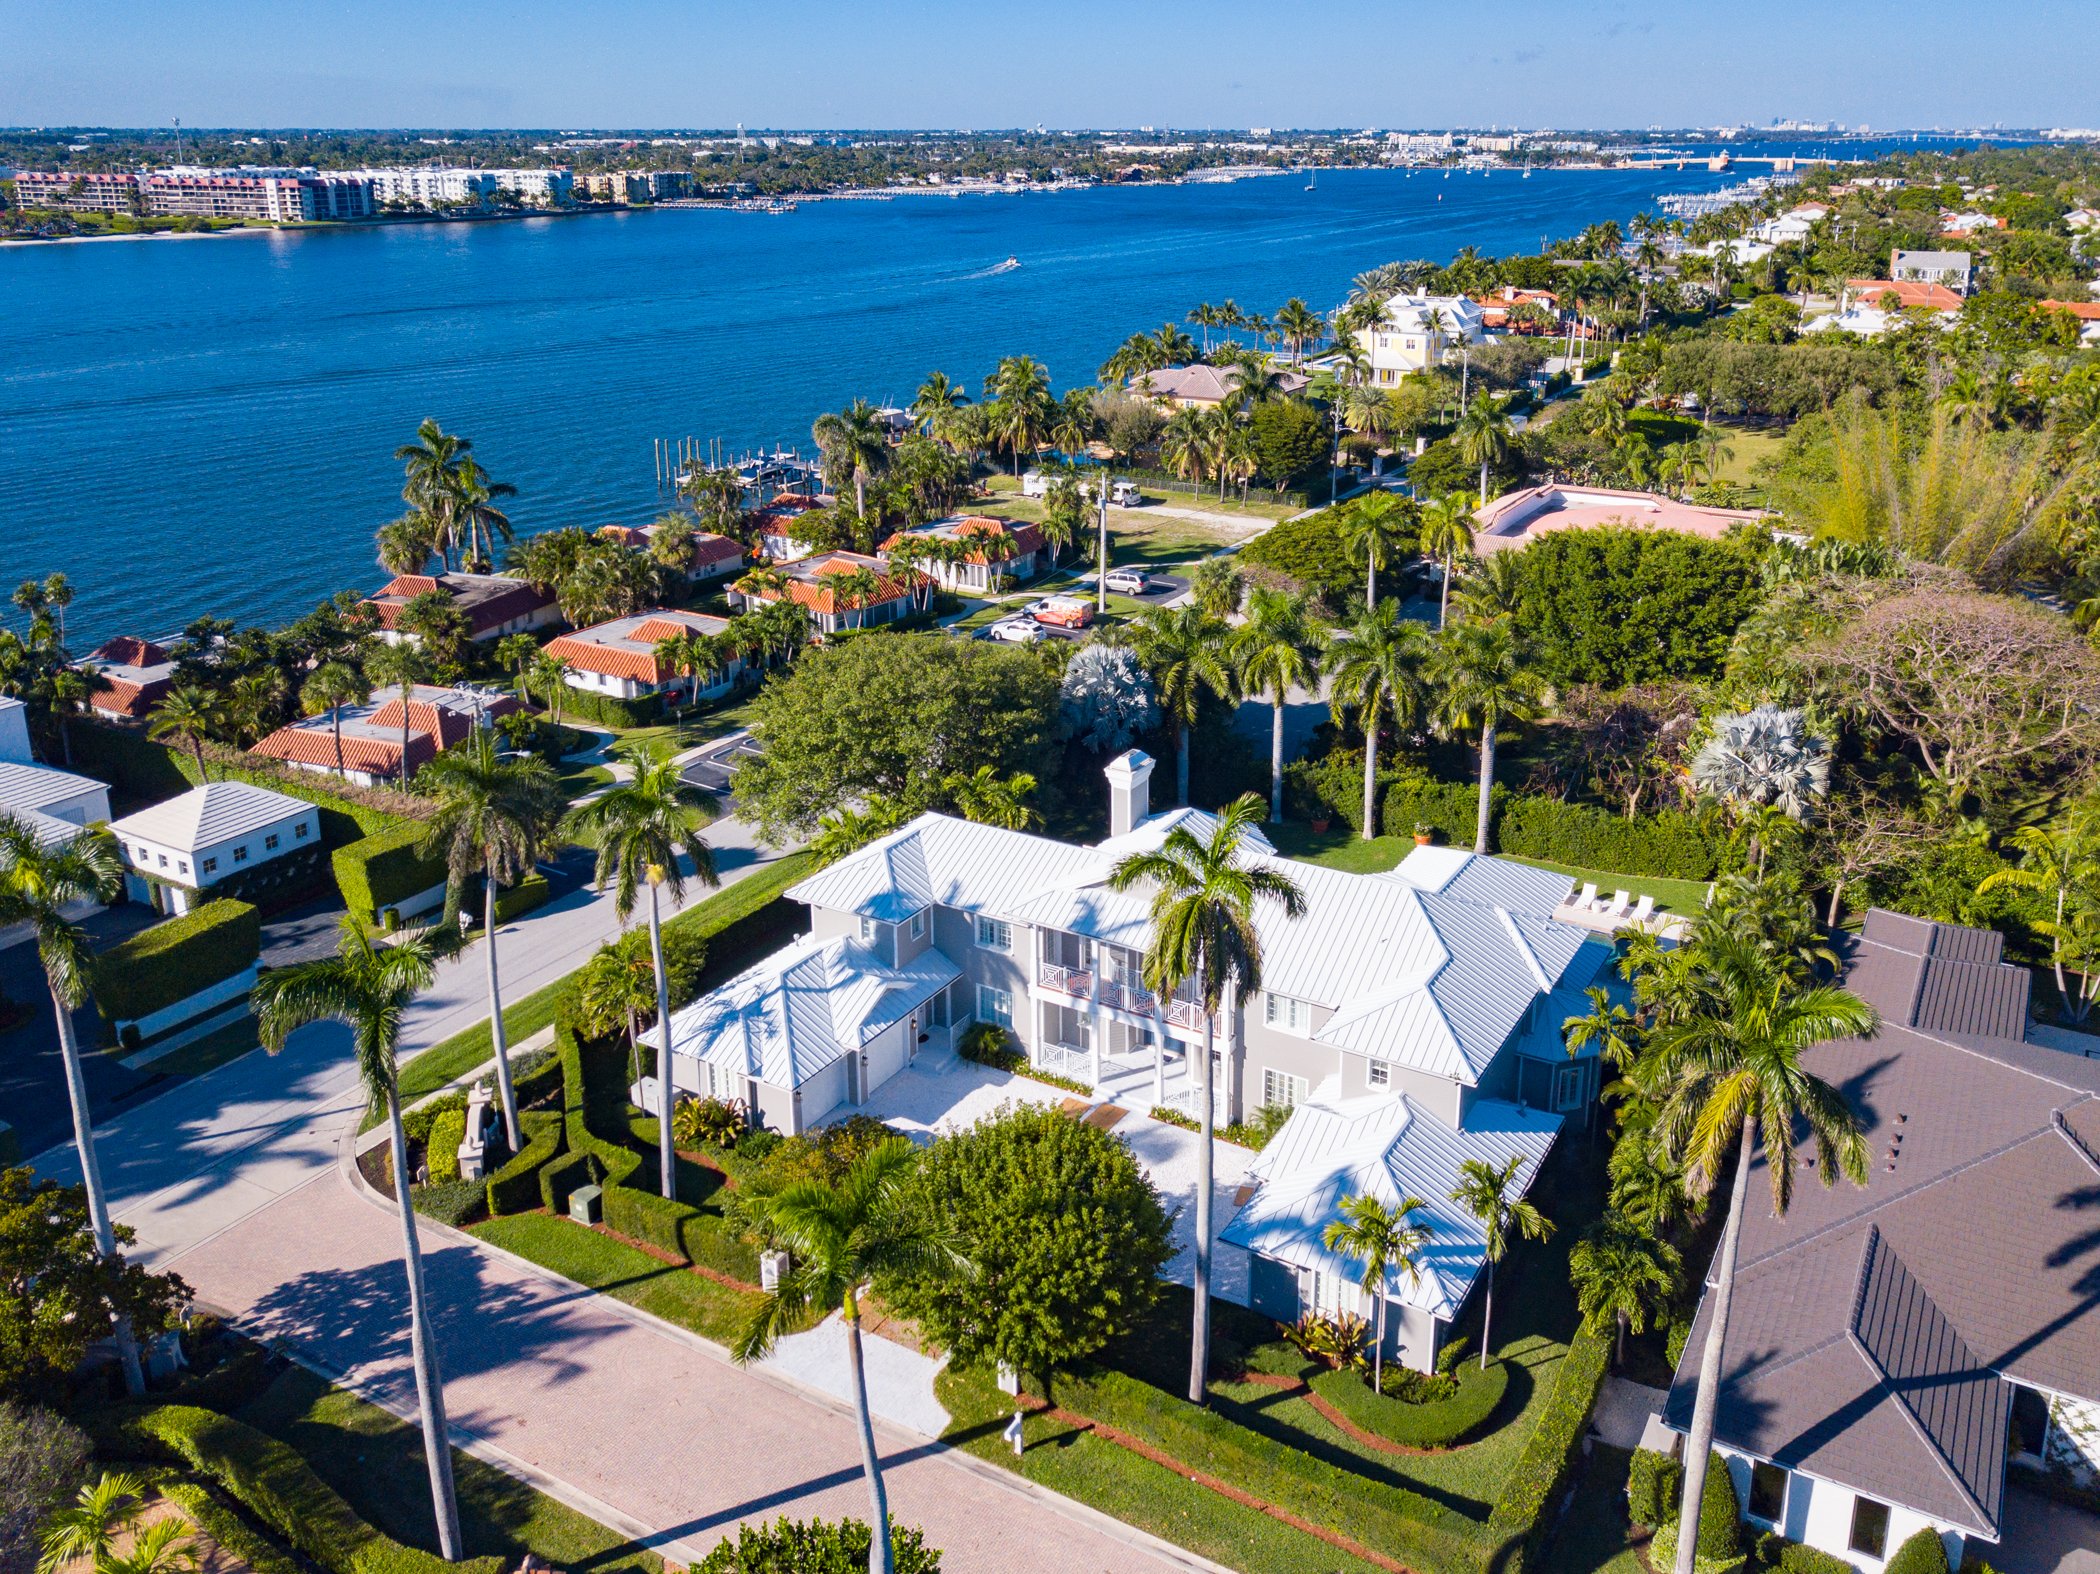 Check Out This Newly Renovated Coastal Contemporary In The Exclusive Point Manalapan Which Just Listed For $7.995 Million 5.jpeg